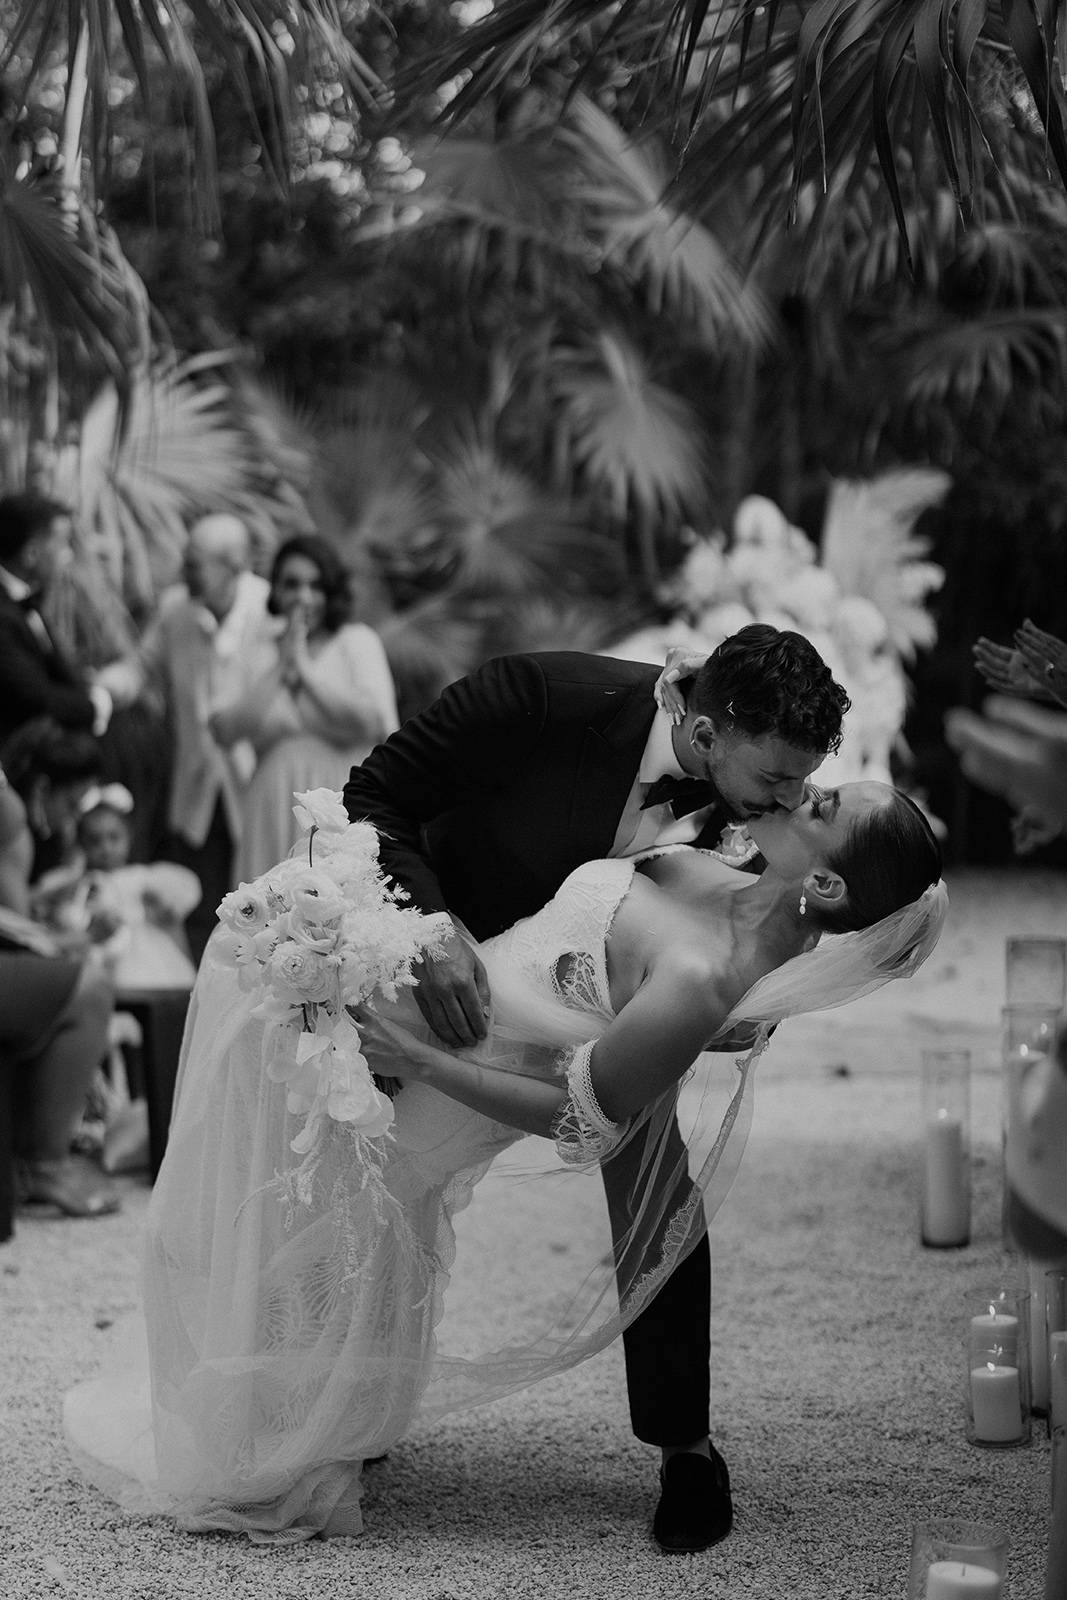 The bride and groom sharing a dip kiss